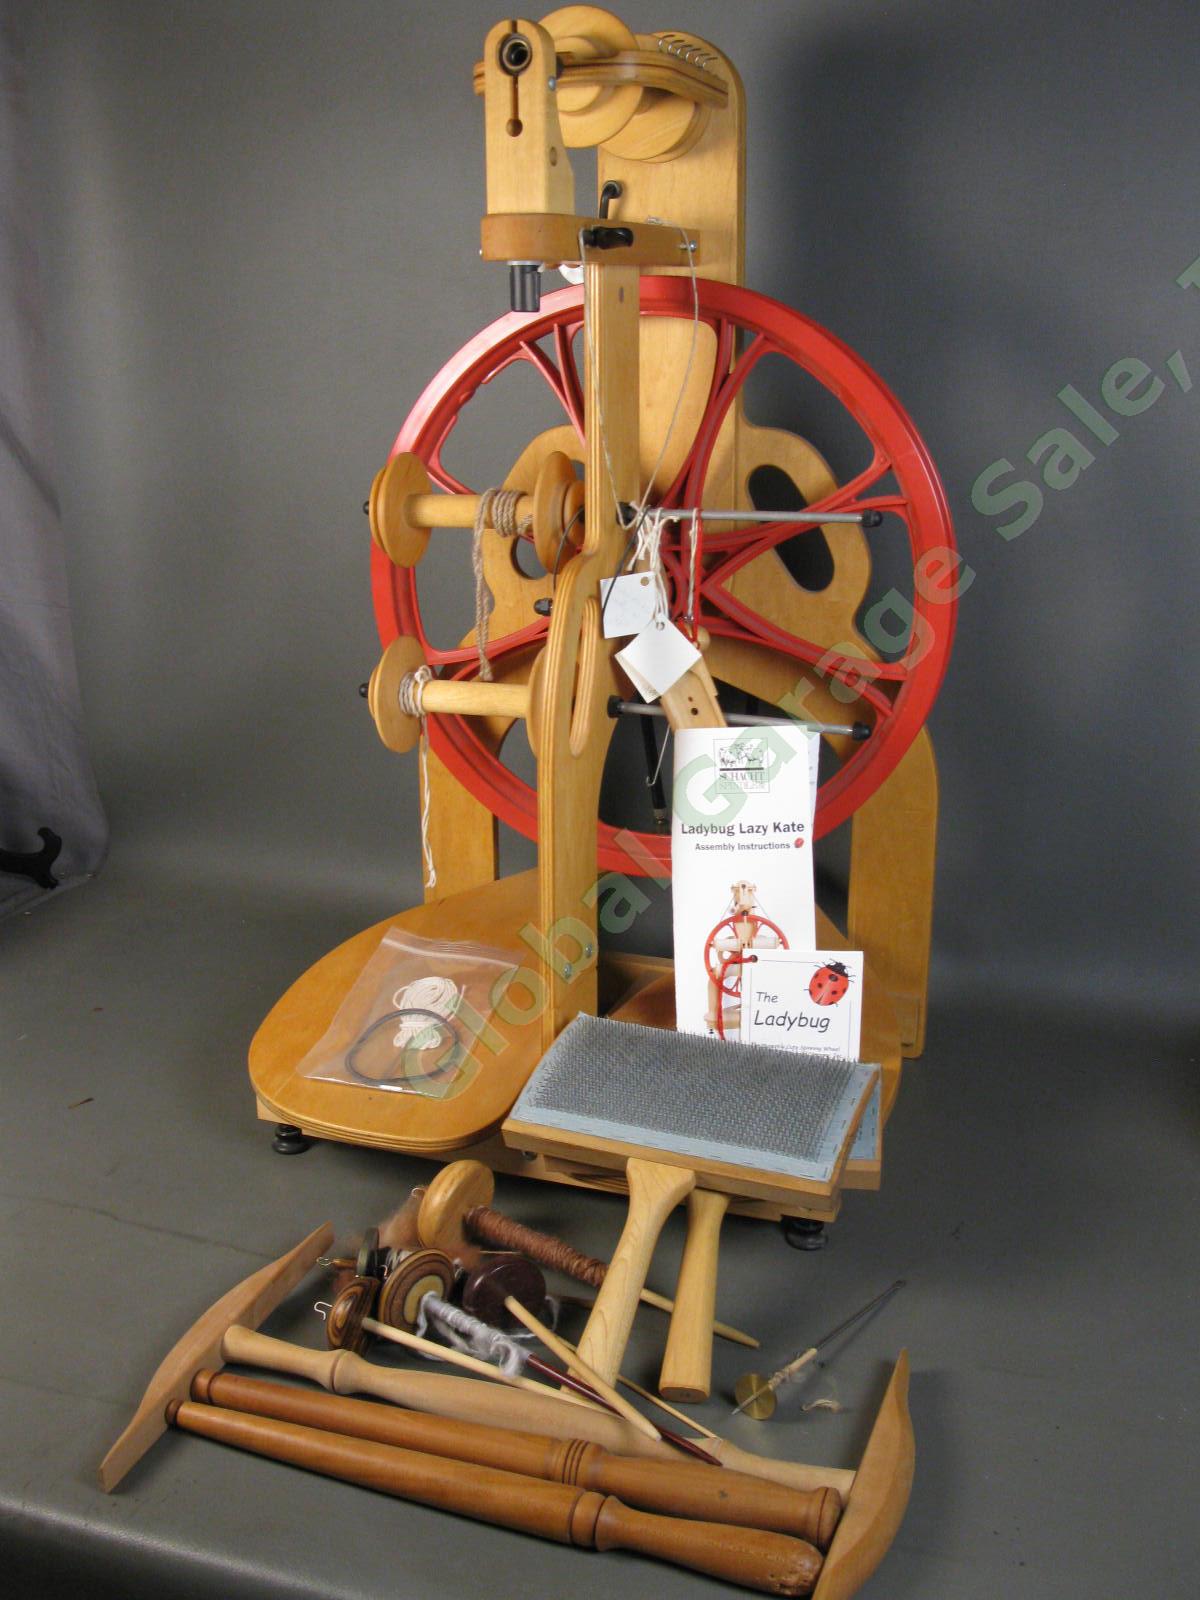 Schacht Ladybug Spinning Wheel Lazy Kate & MORE Accessories Excellent Condition